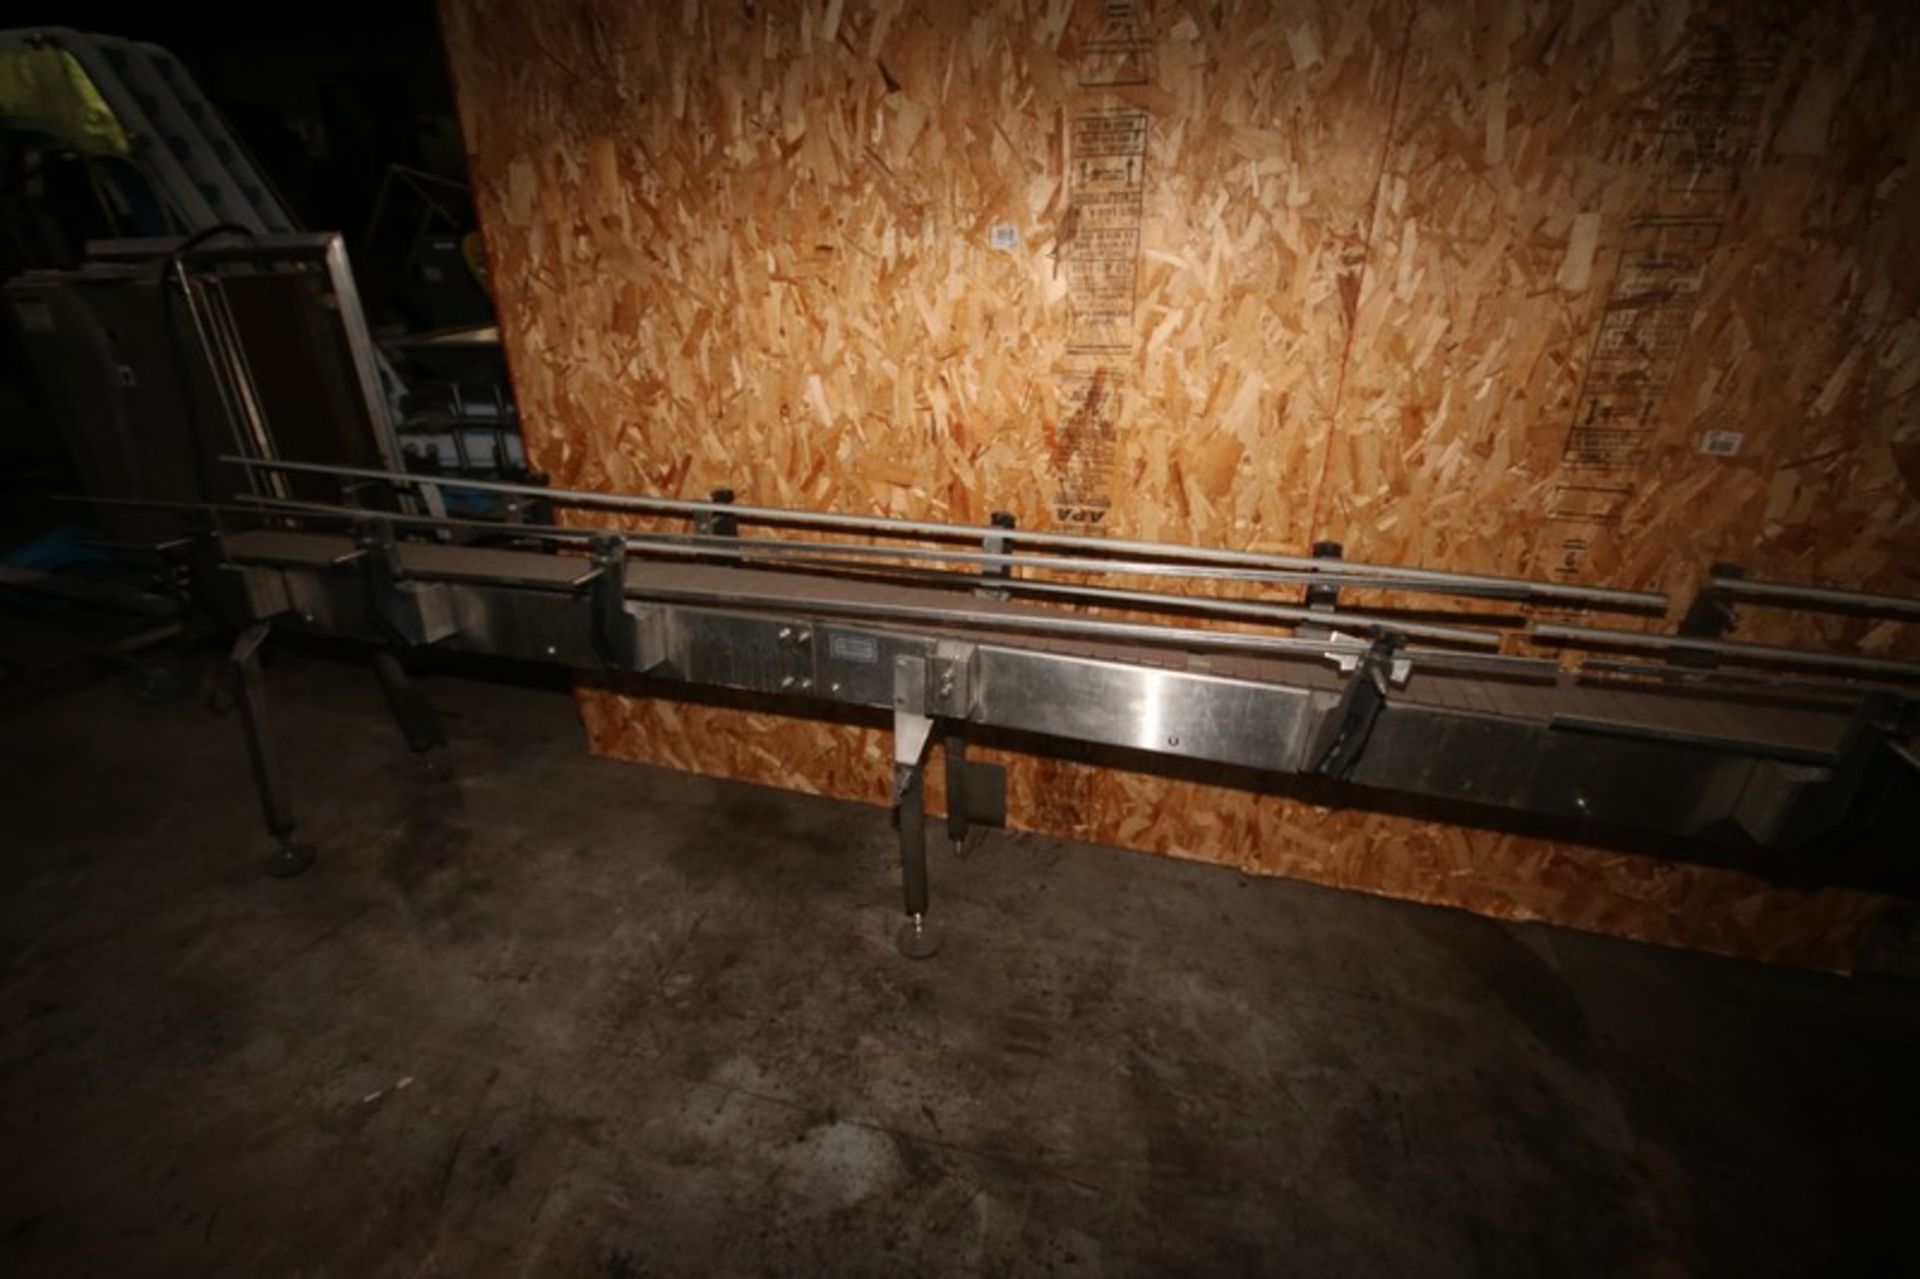 Straight Section of Conveyor, Overall Dims.: Aprox. 22' L x 7.5" W Conveyor Chain - Image 4 of 4